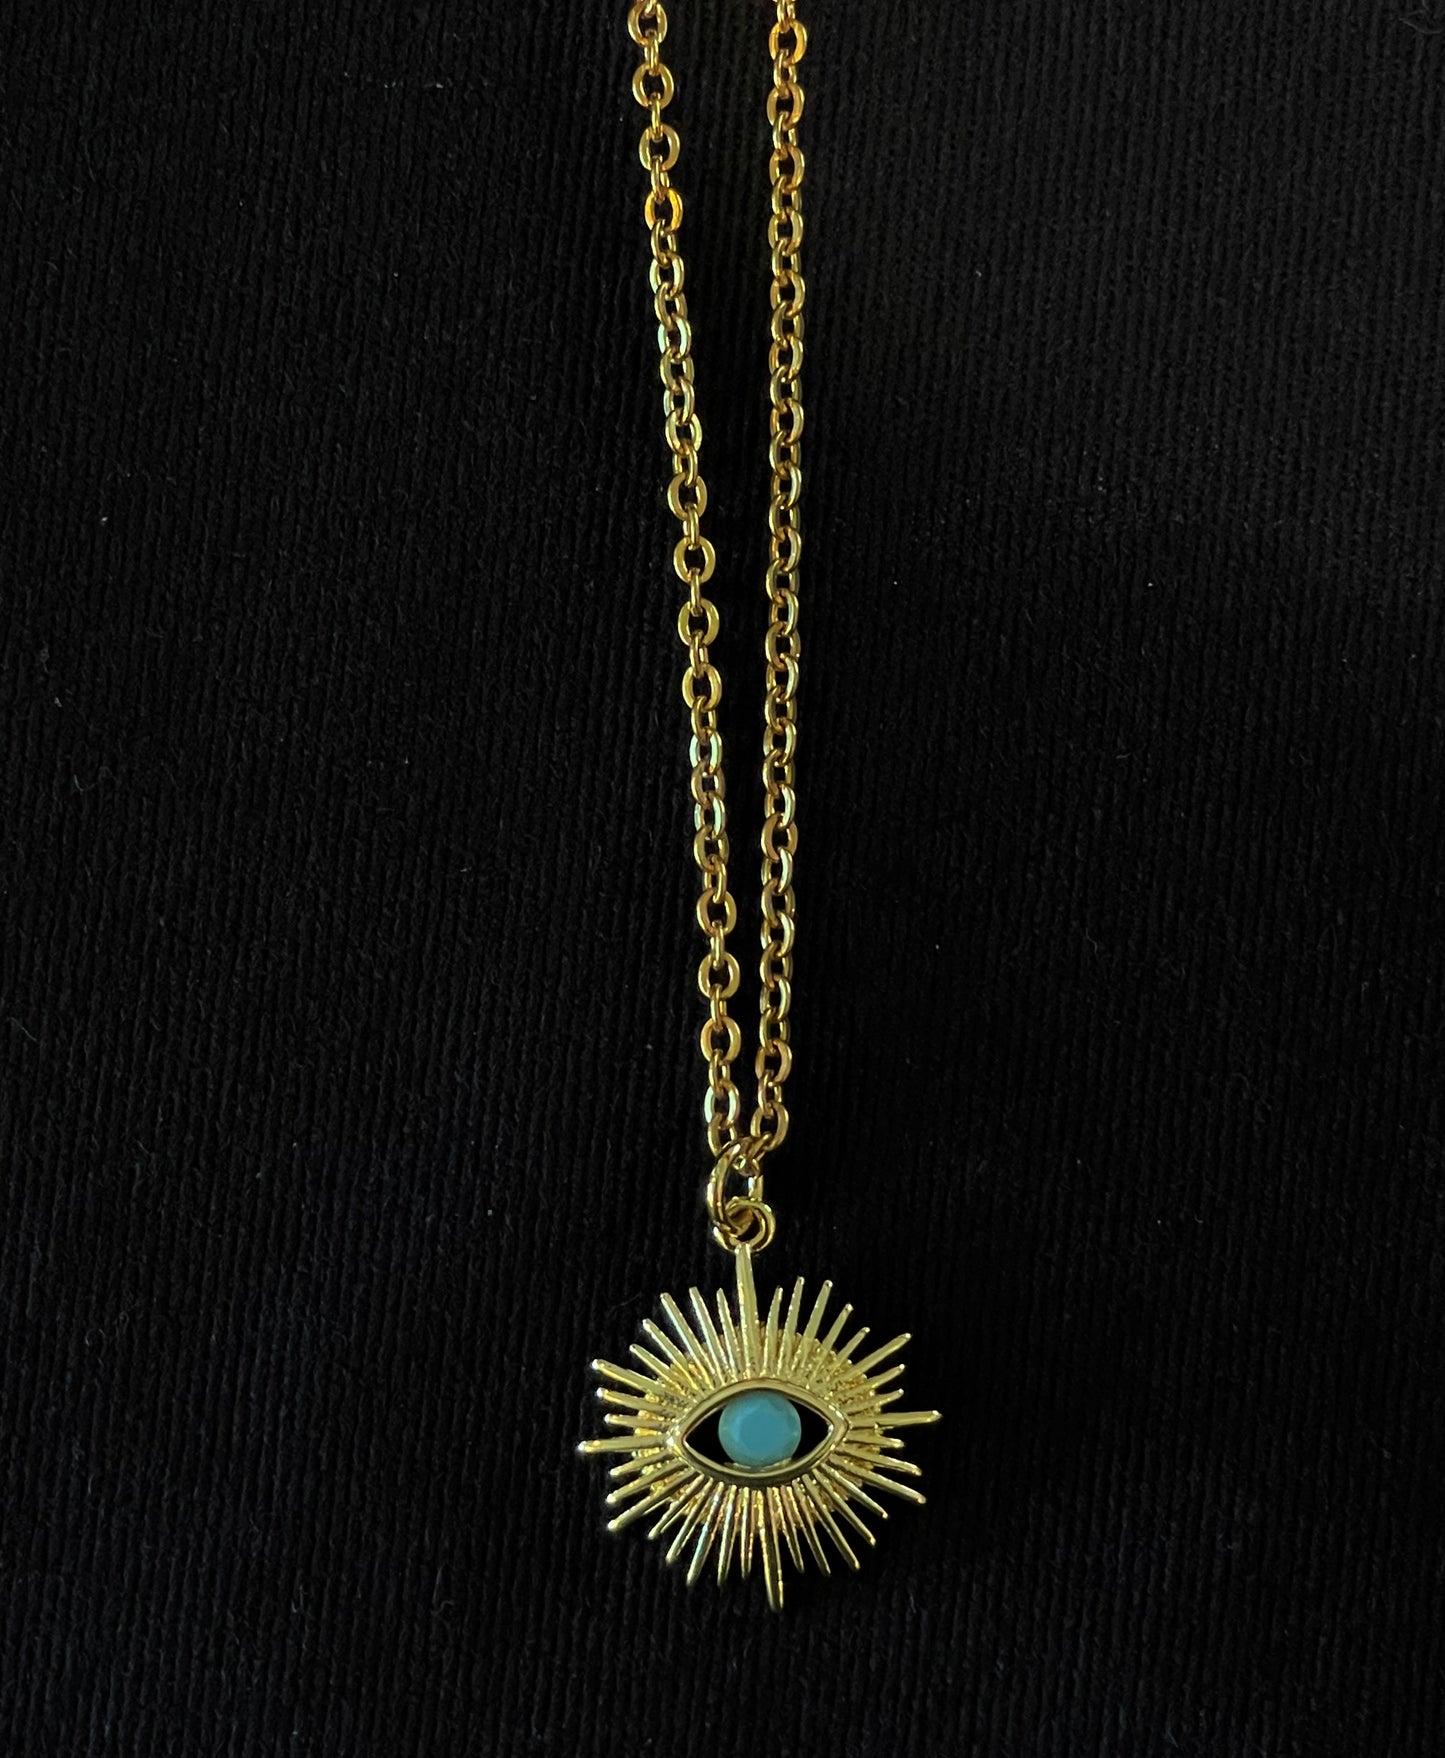 Gold starburst evil eye pendant with turquoise stone on chain